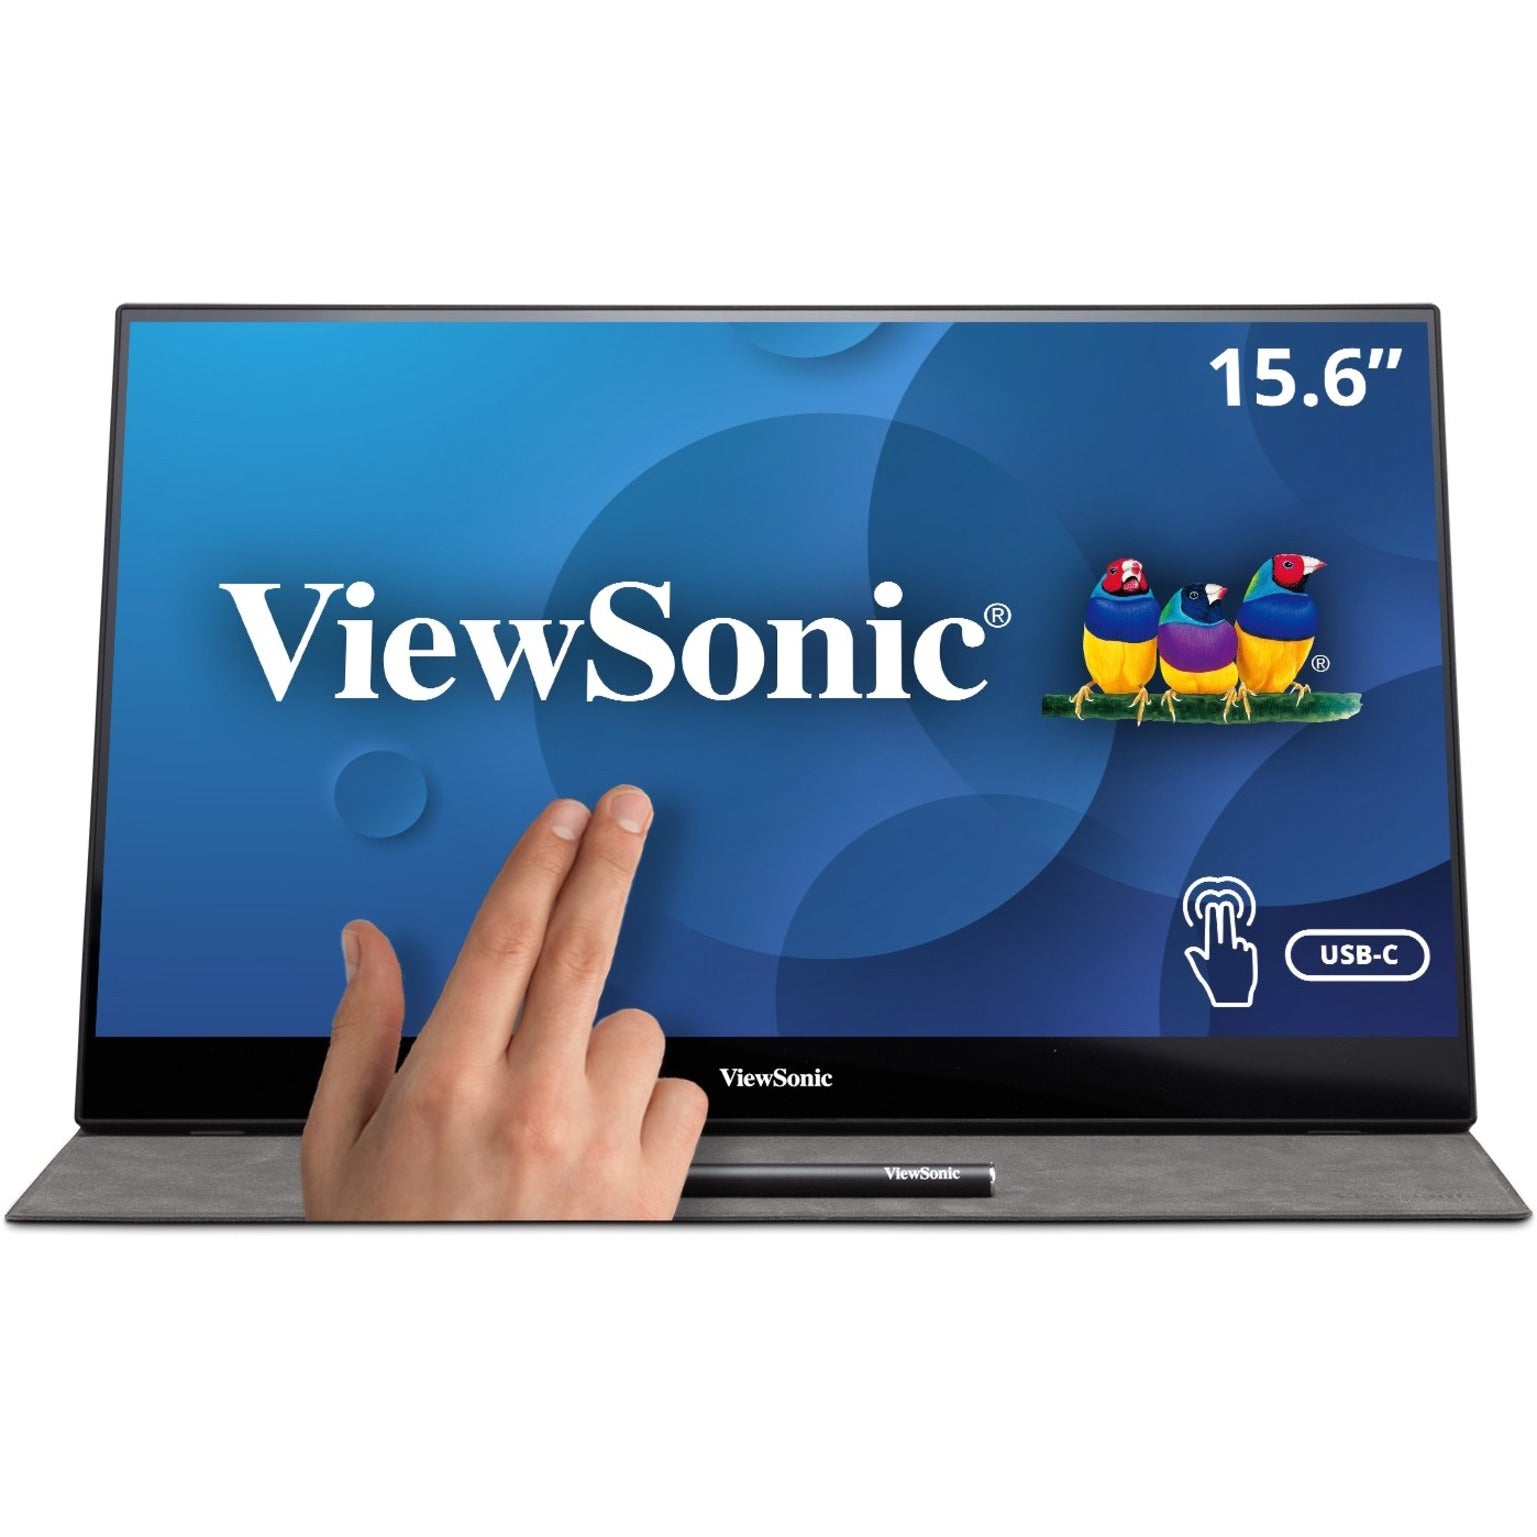 ViewSonic TD1655 Touchscreen LCD Monitor, 15.6" Portable Touch Display with FHD 1080p, 2-Way Power with USB Type-C